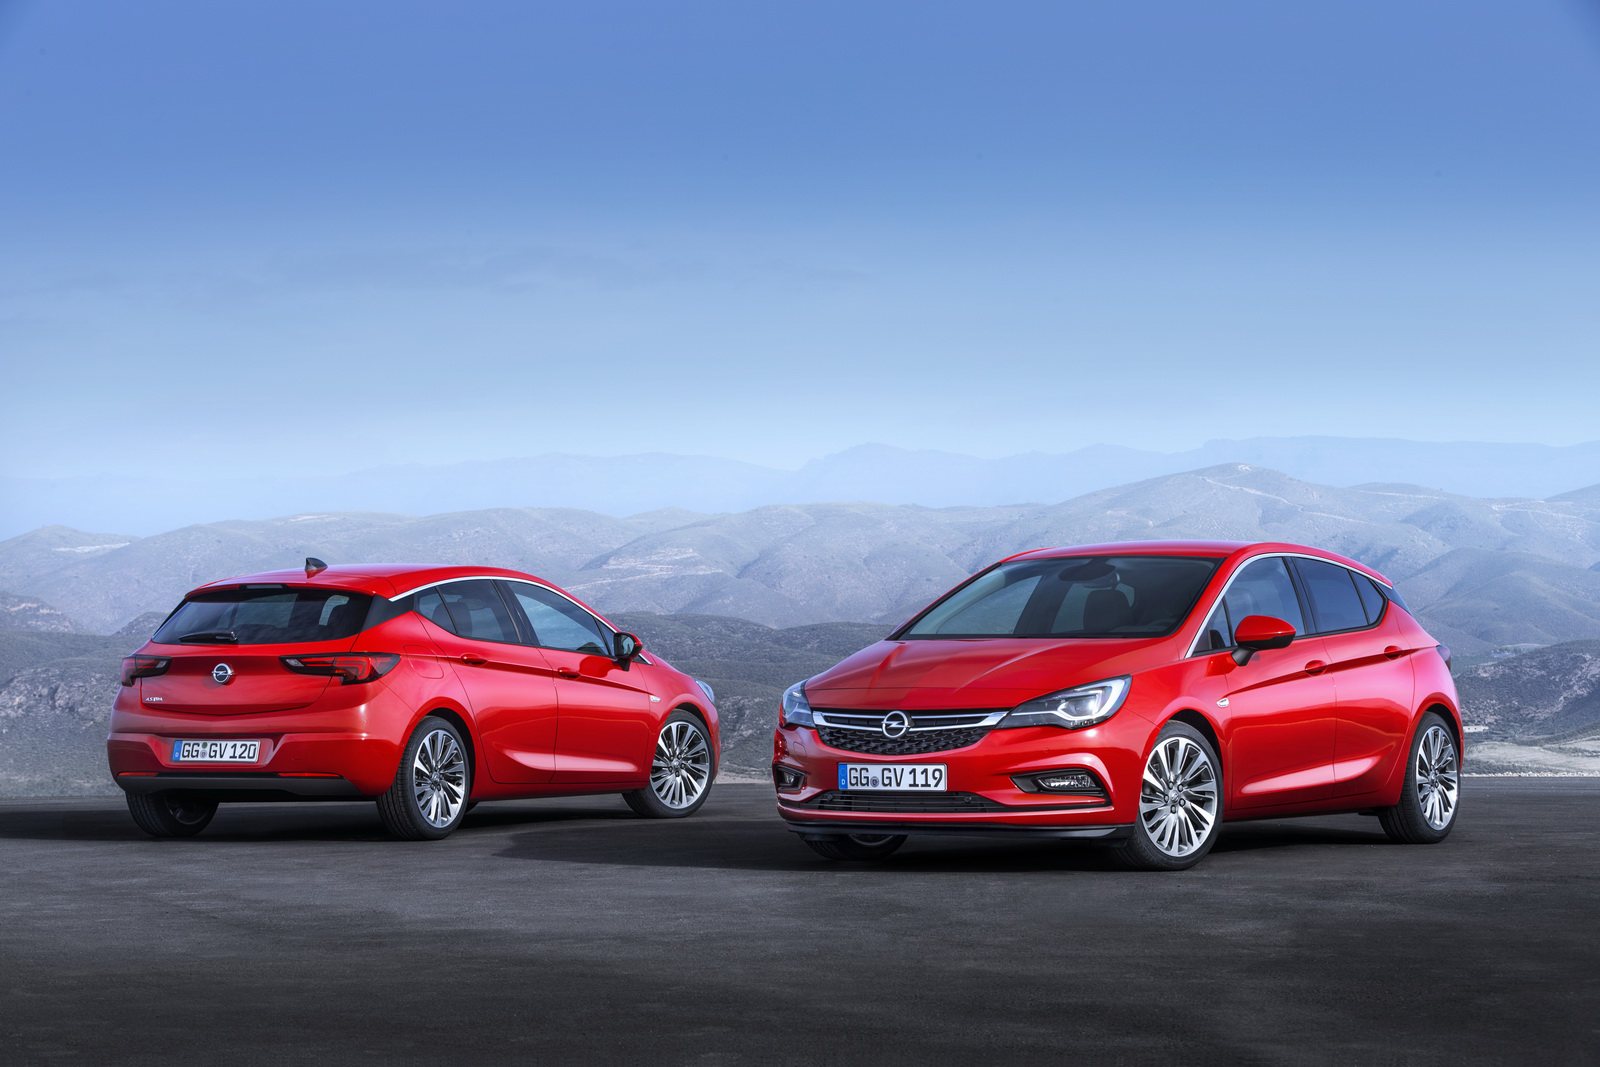 Opel Prices All-New Astra From €17,960 In Germany